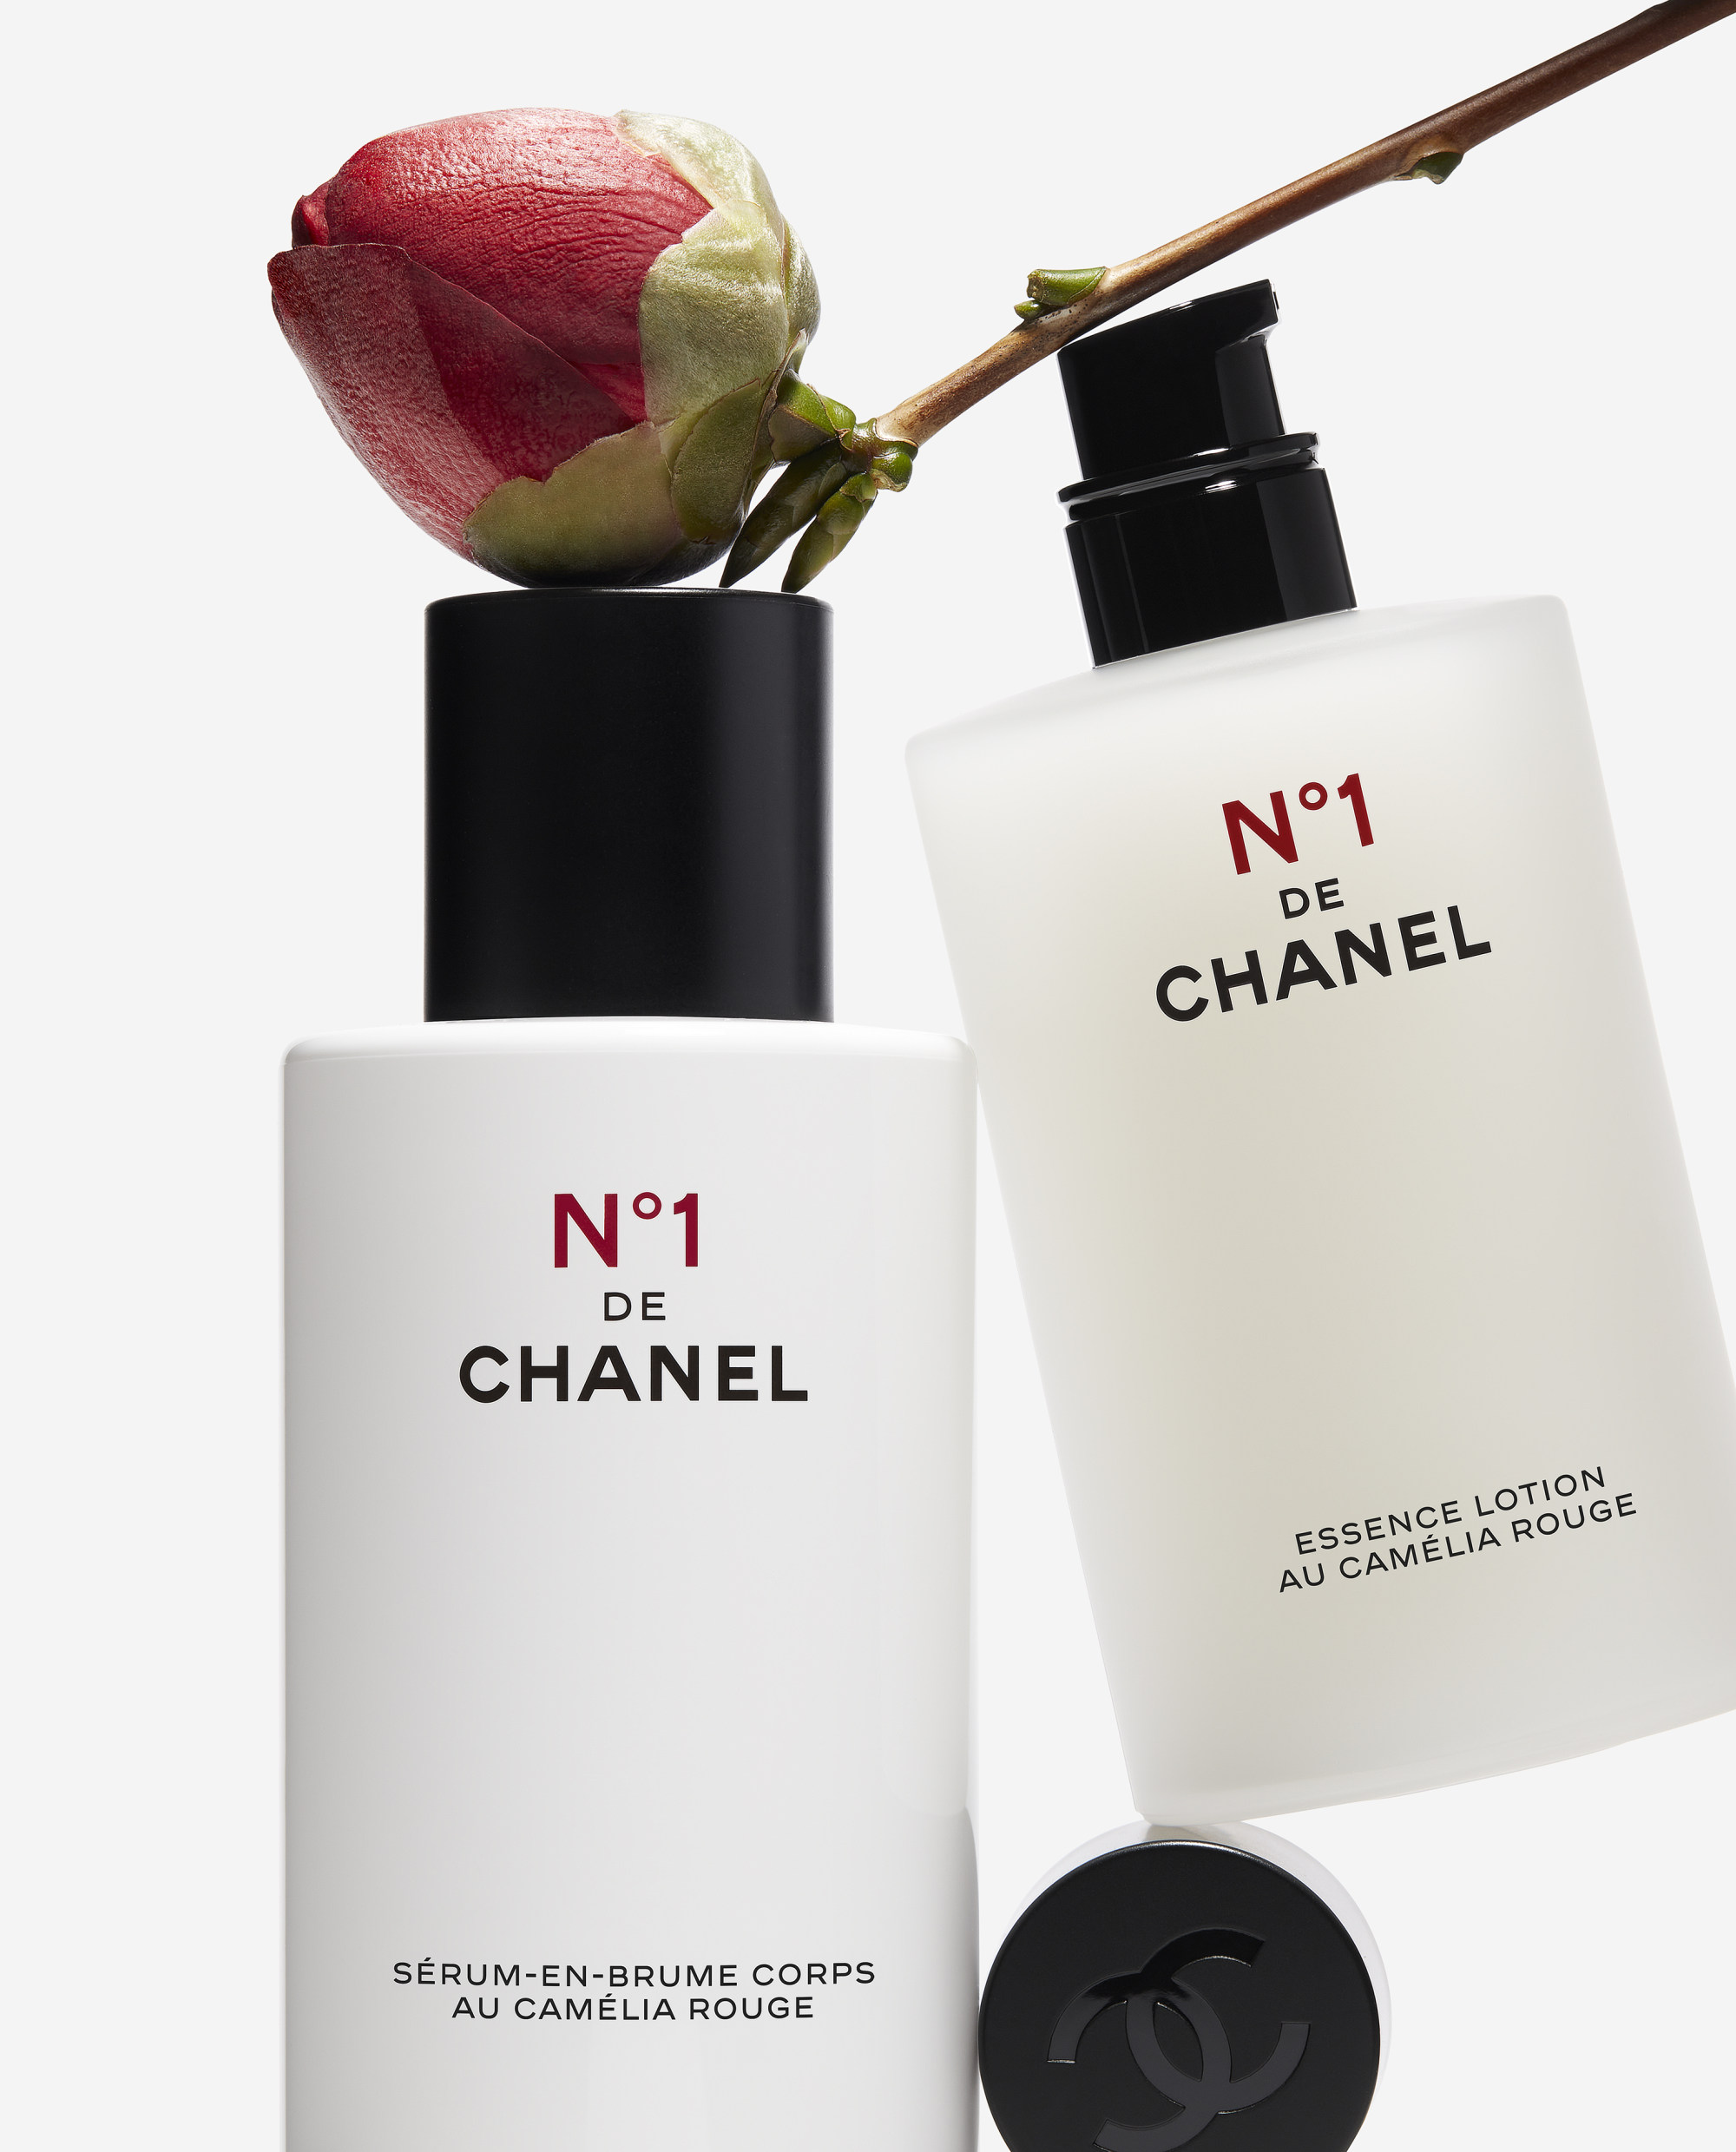 POST EDIT: N°1 de Chanel skincare's magic lies in the red camellia